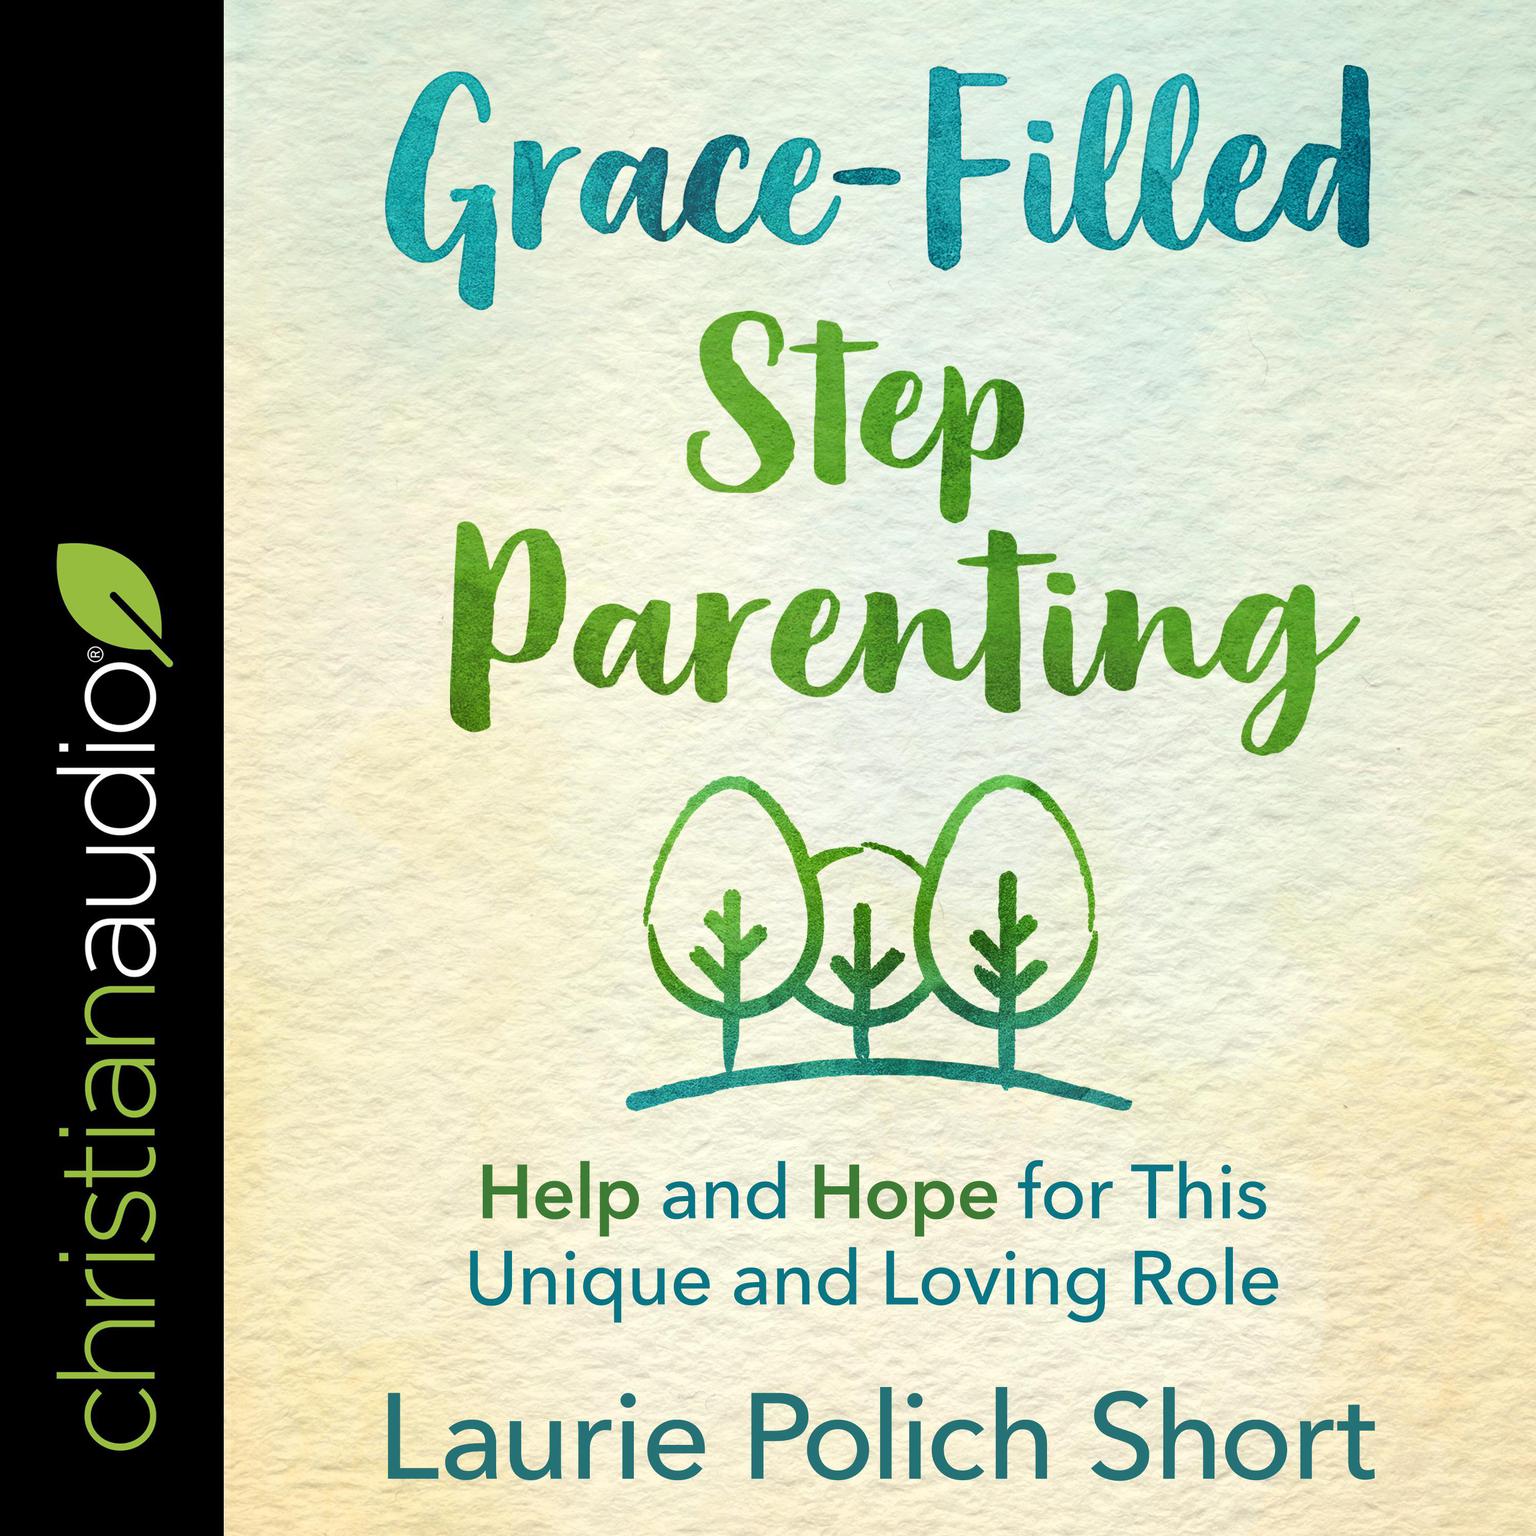 Grace-Filled Stepparenting: Help and Hope for This Unique and Loving Role Audiobook, by Laurie Polich Short